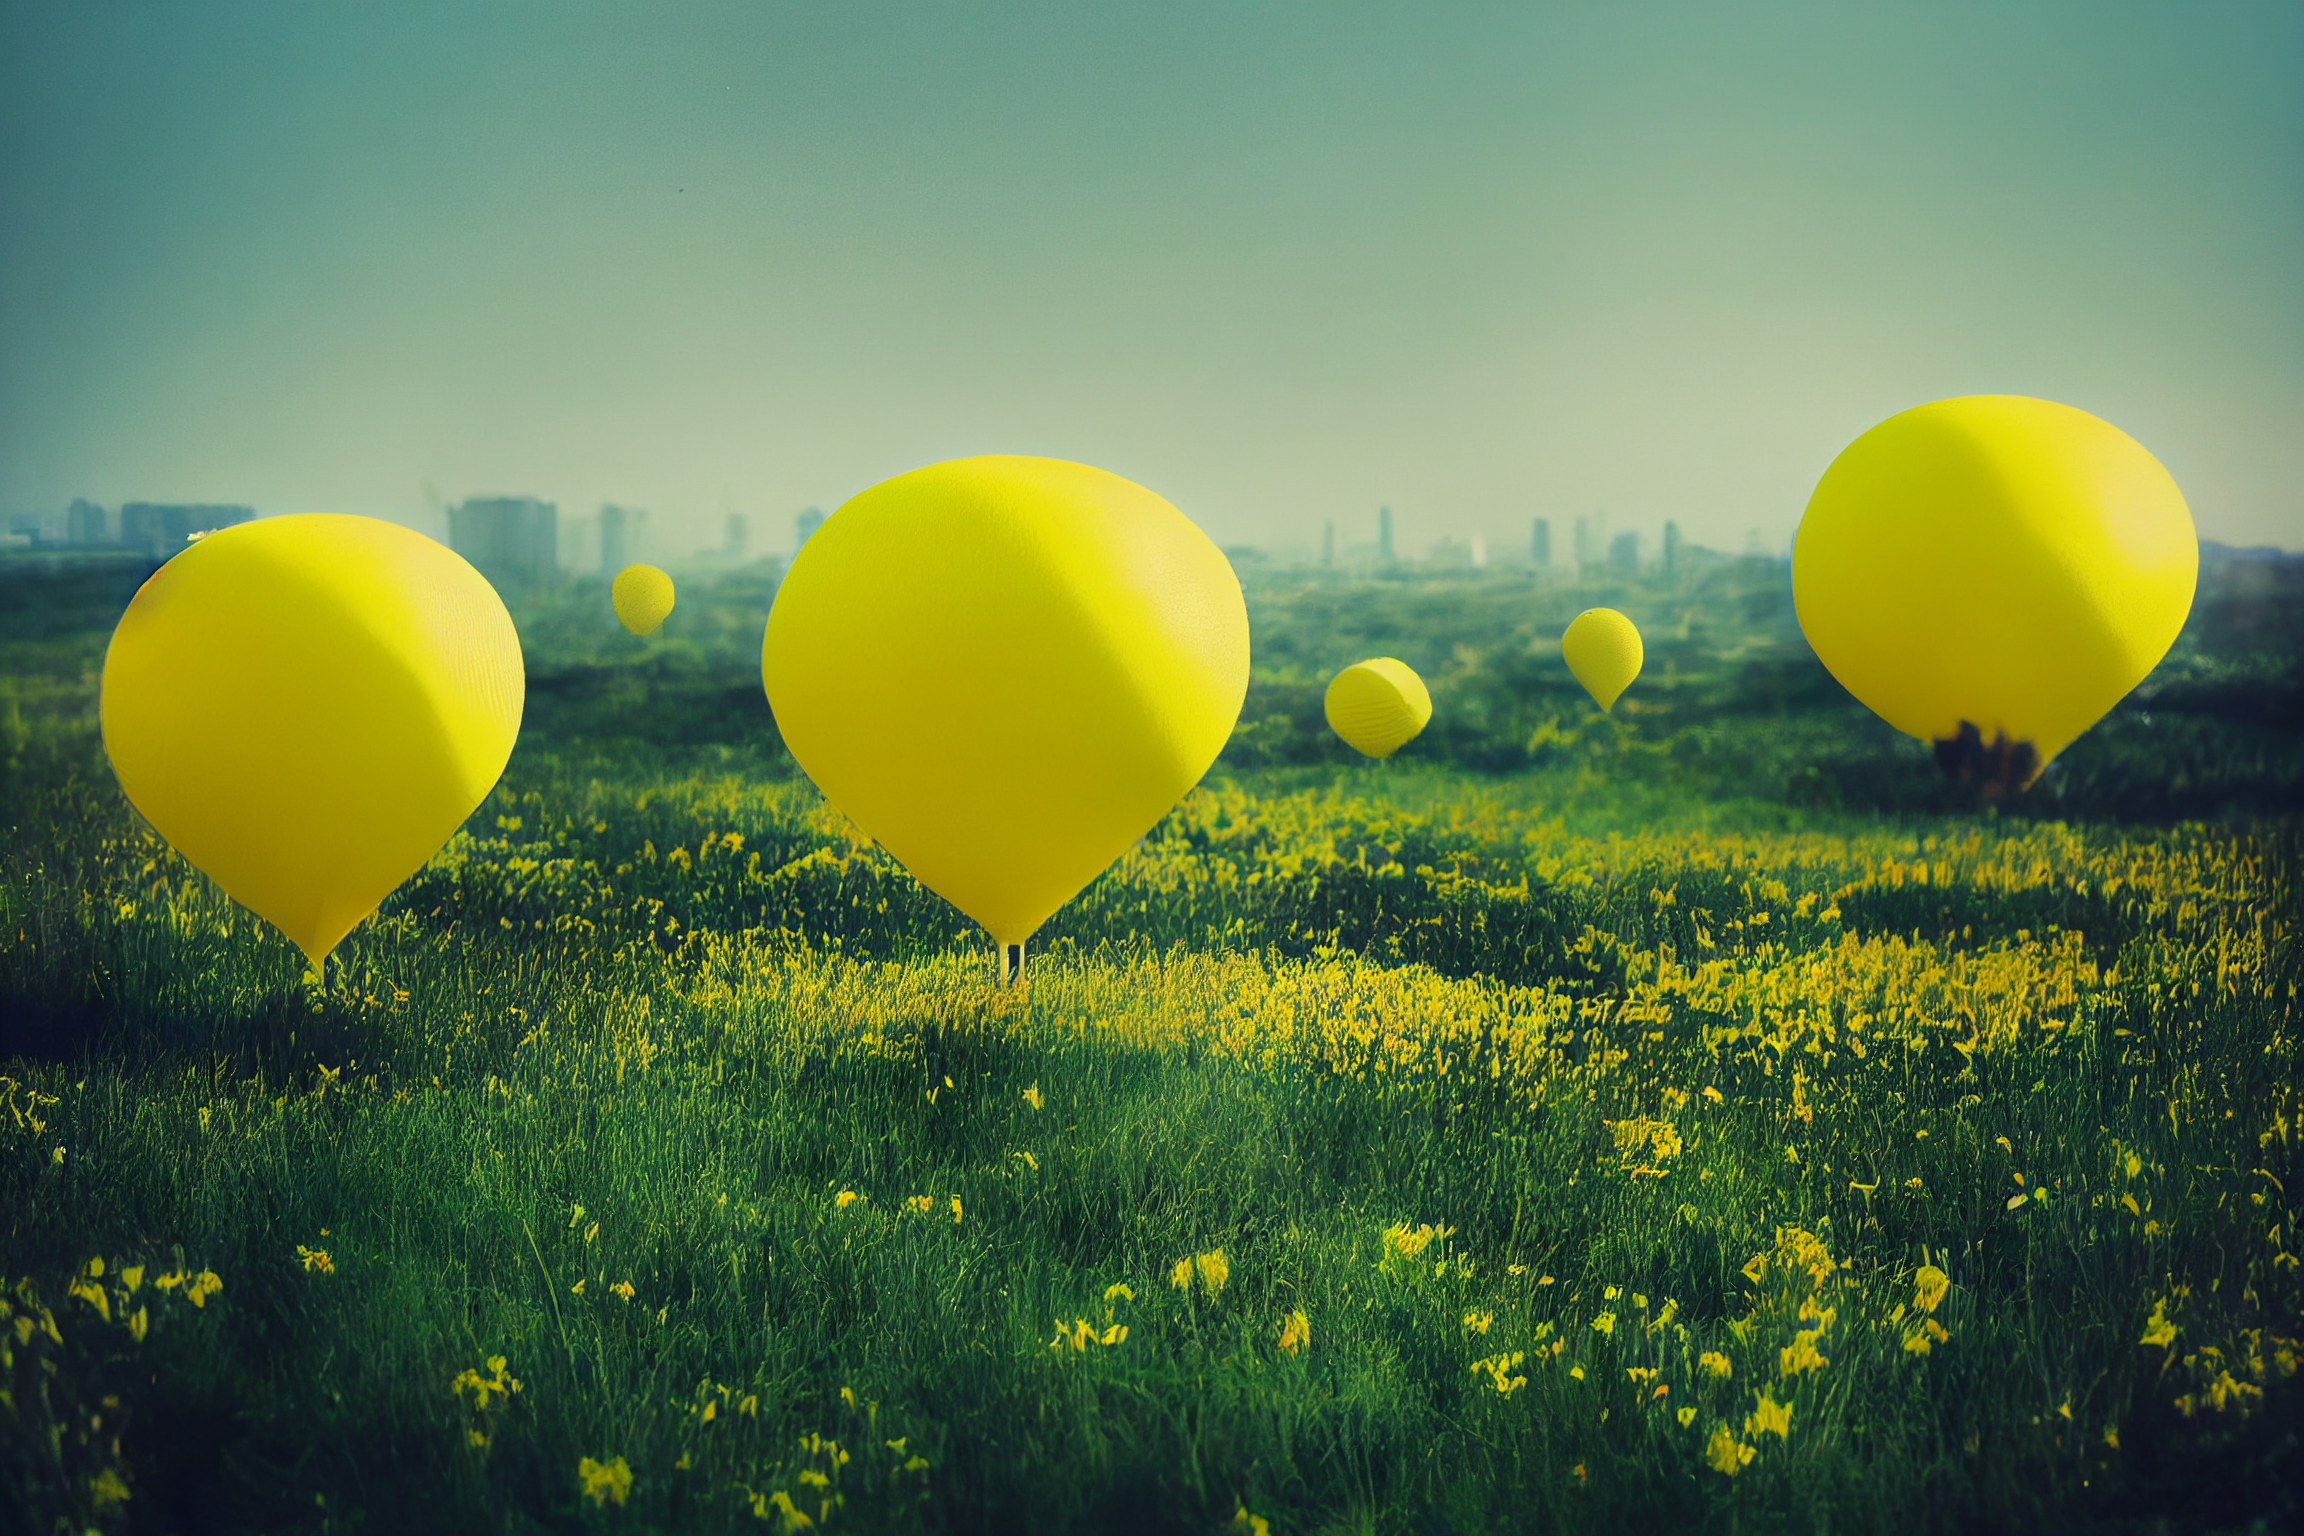 I’ll keep my head up high through the downs and lows – Yellow balloons